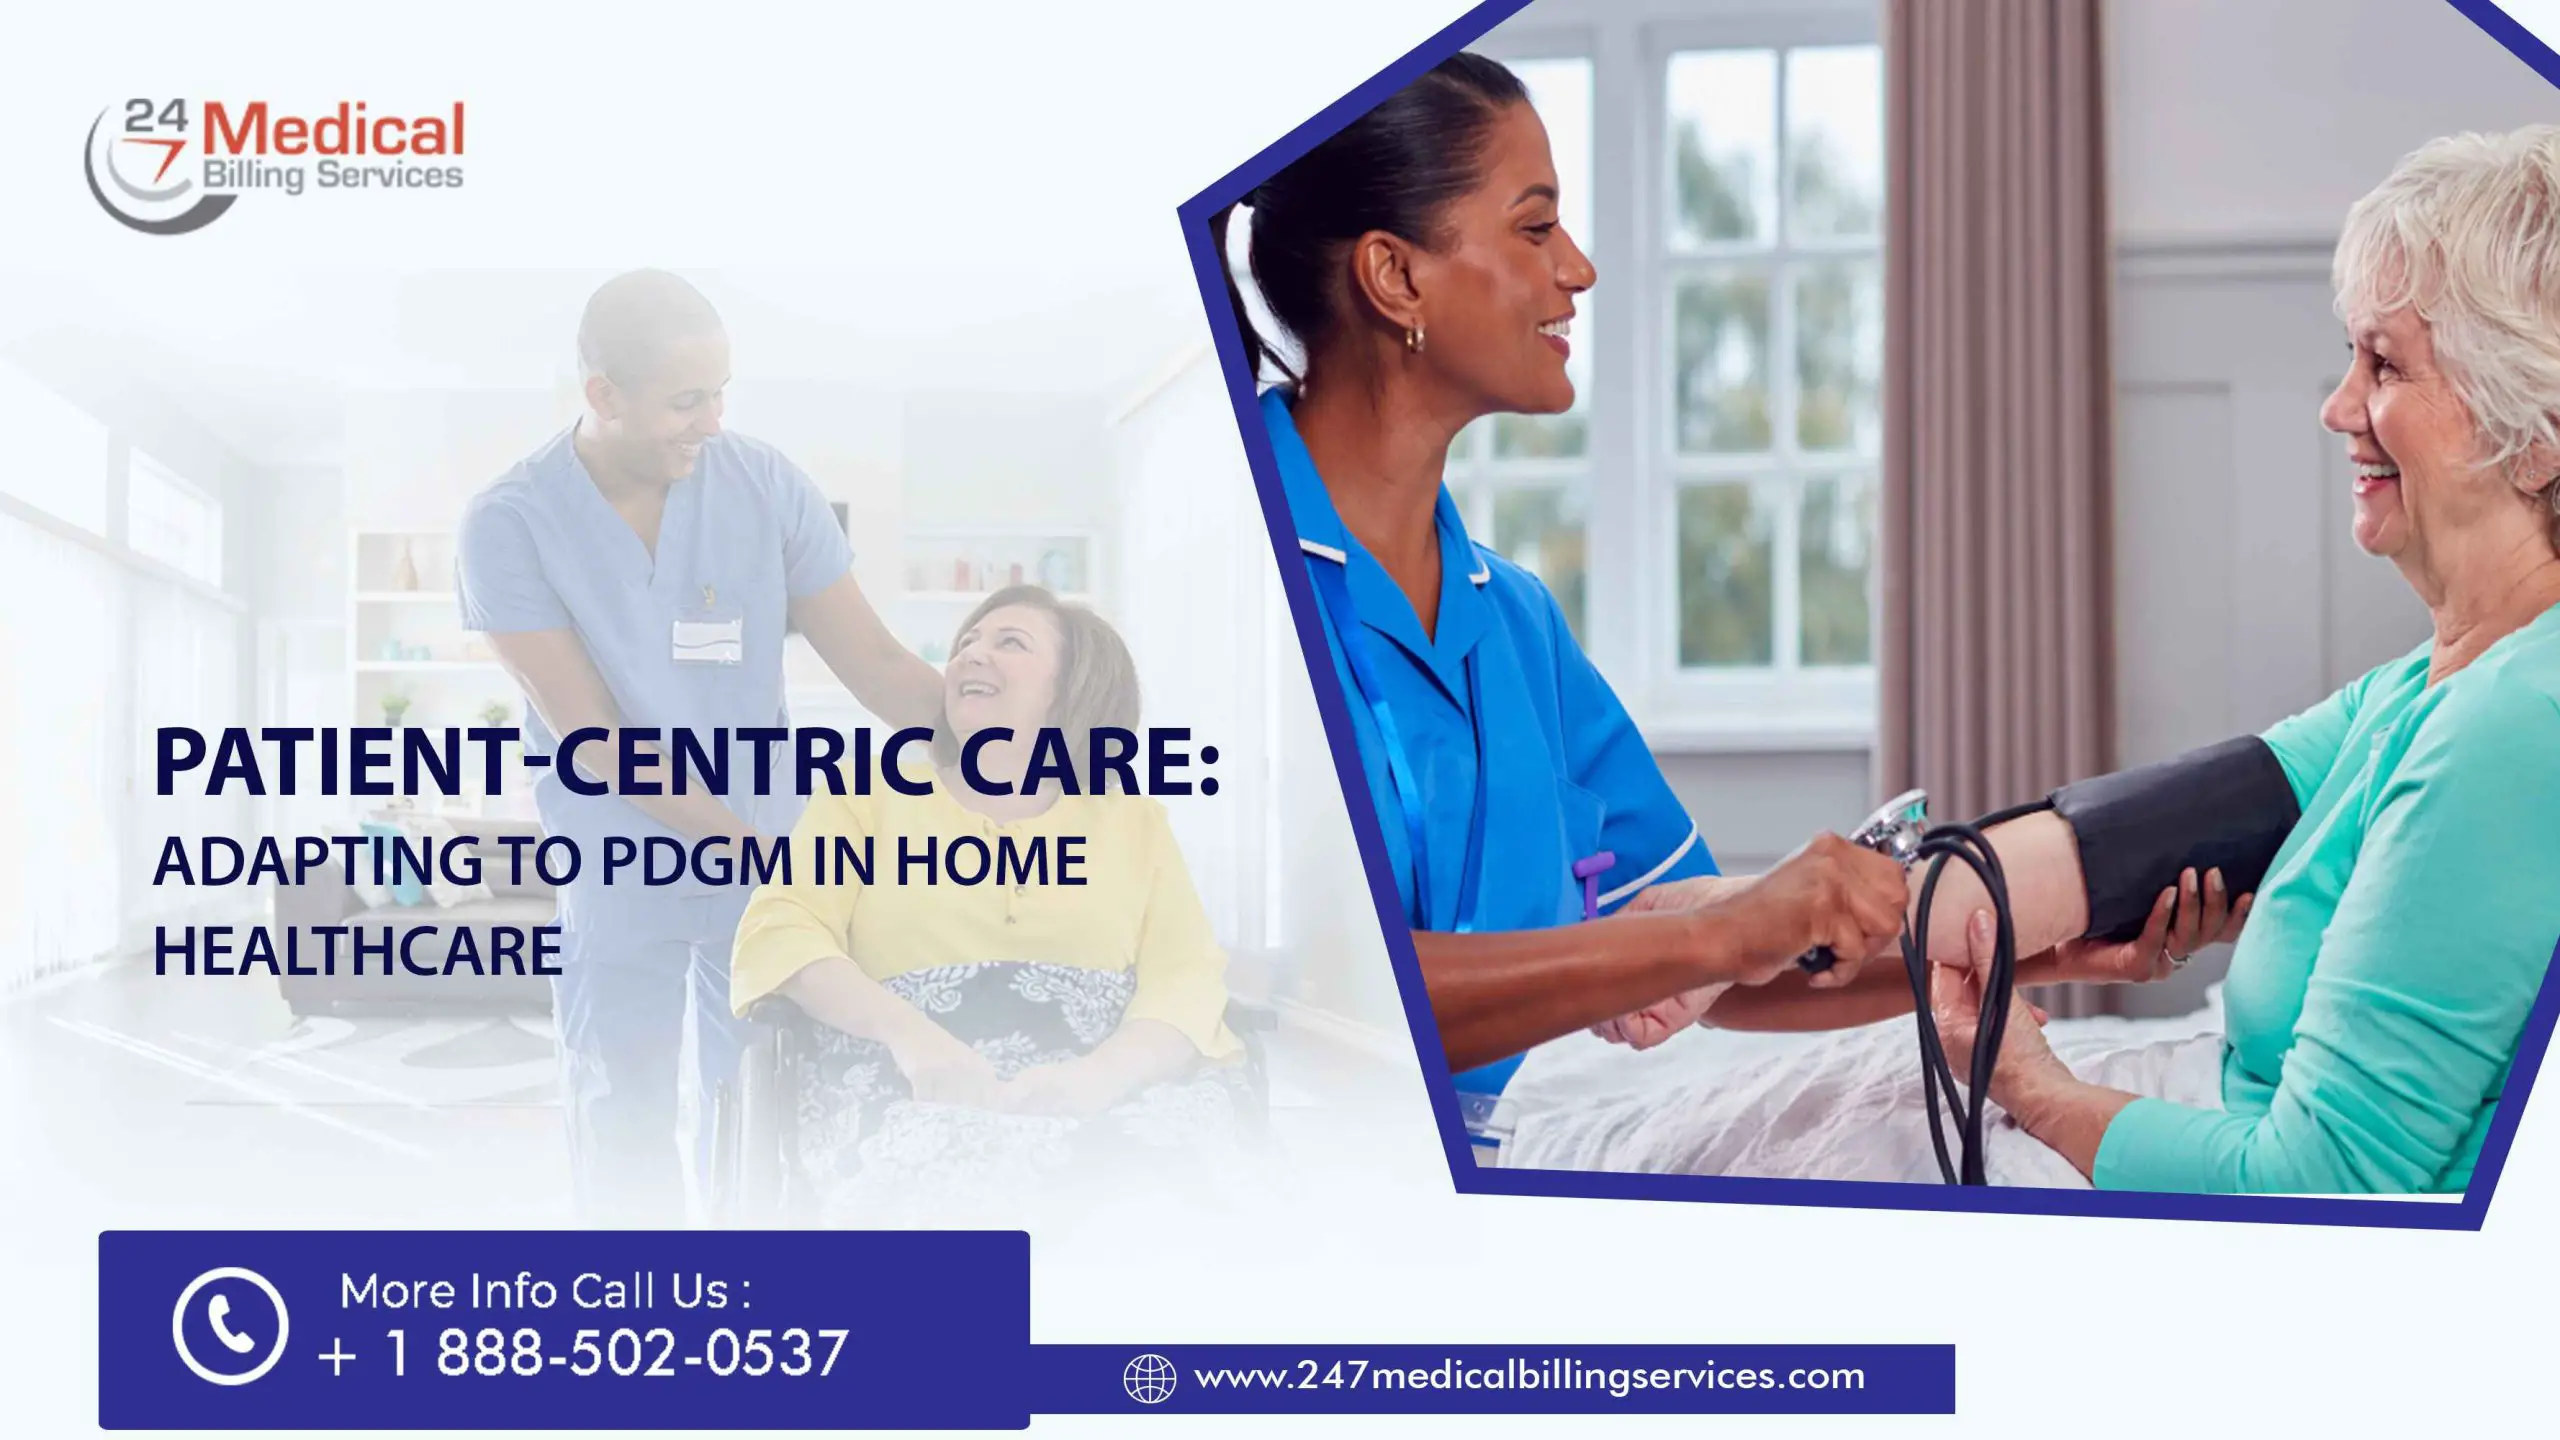 Patient-Centric Care Adapting to PDGM in Home Healthcare